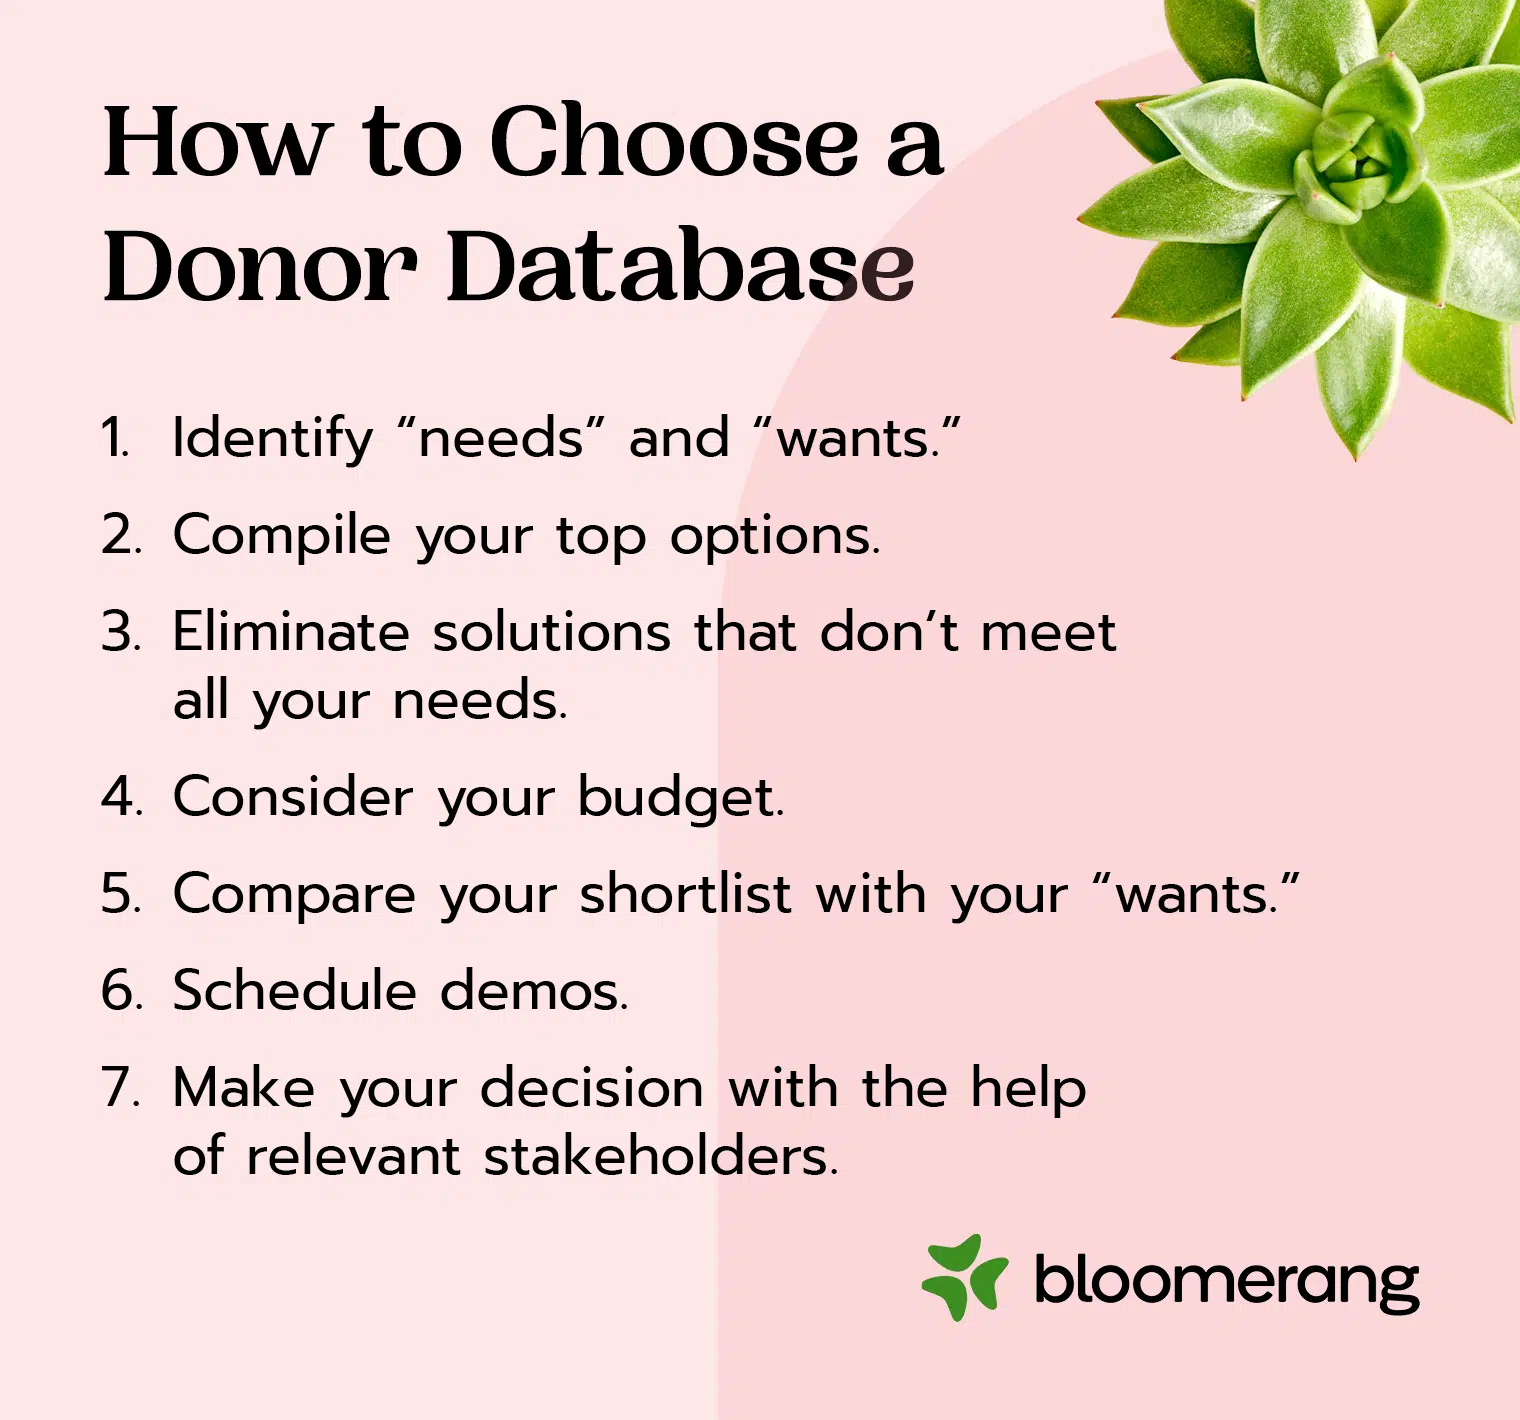 This image shows the steps you should follow to choose a donor database (explained in the list below). 